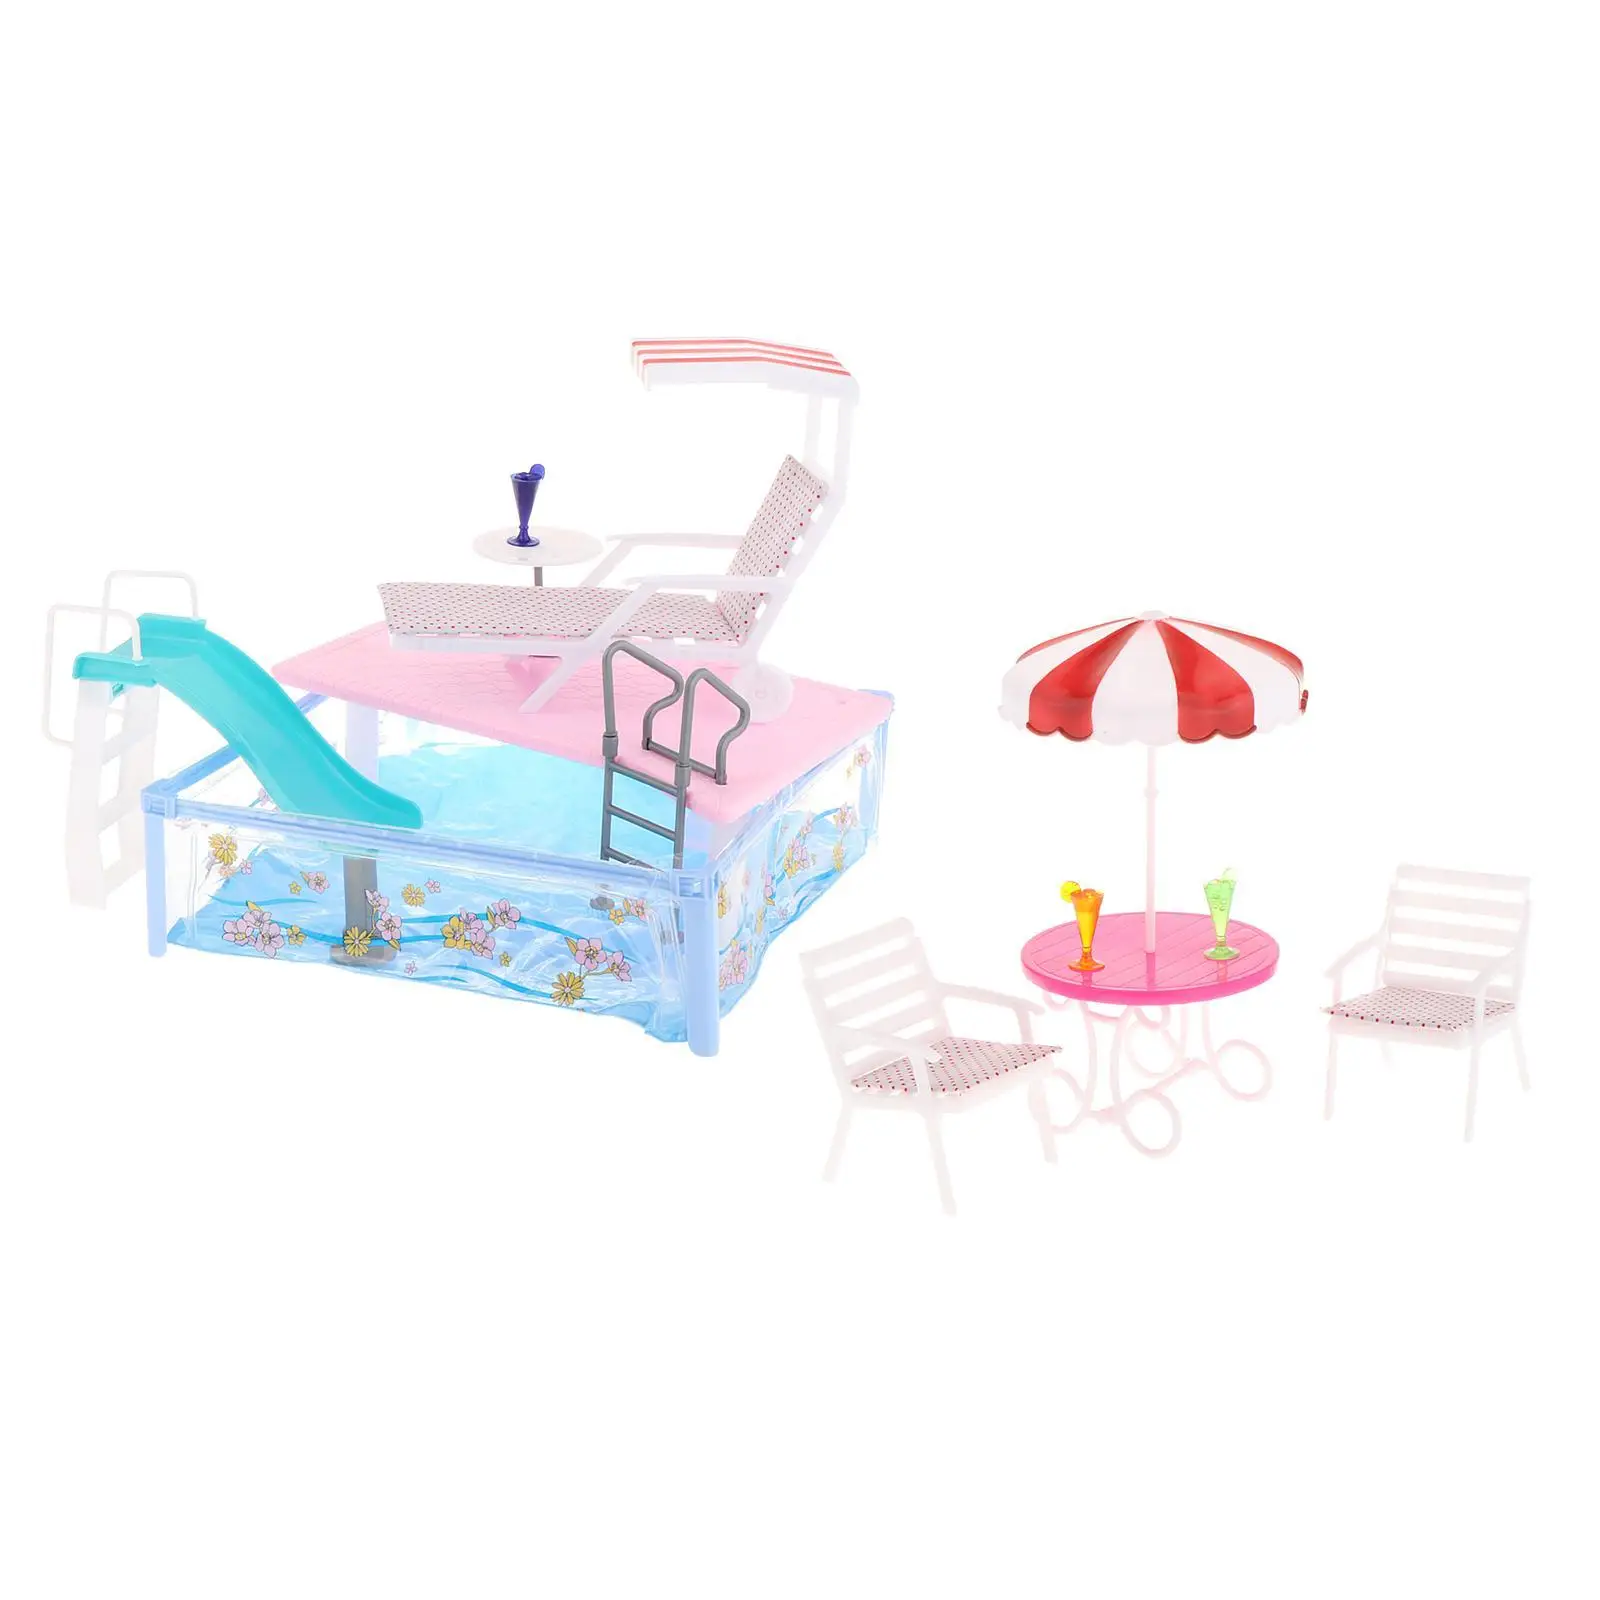 

Pool Playset with Slide, Beach Umbrella and Chair Simulation for 30cm Dolls